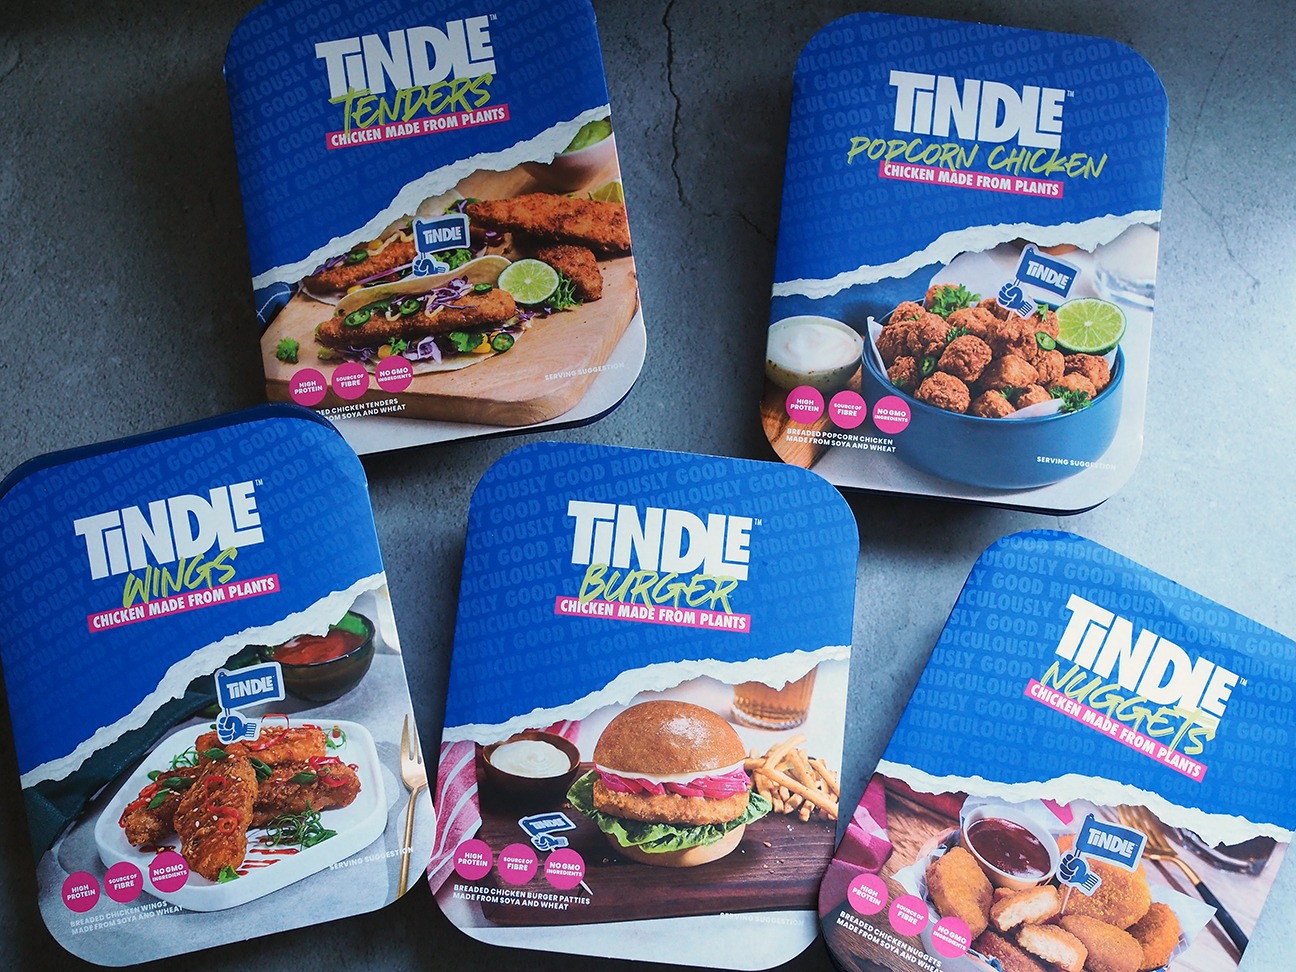 TiNDLE products